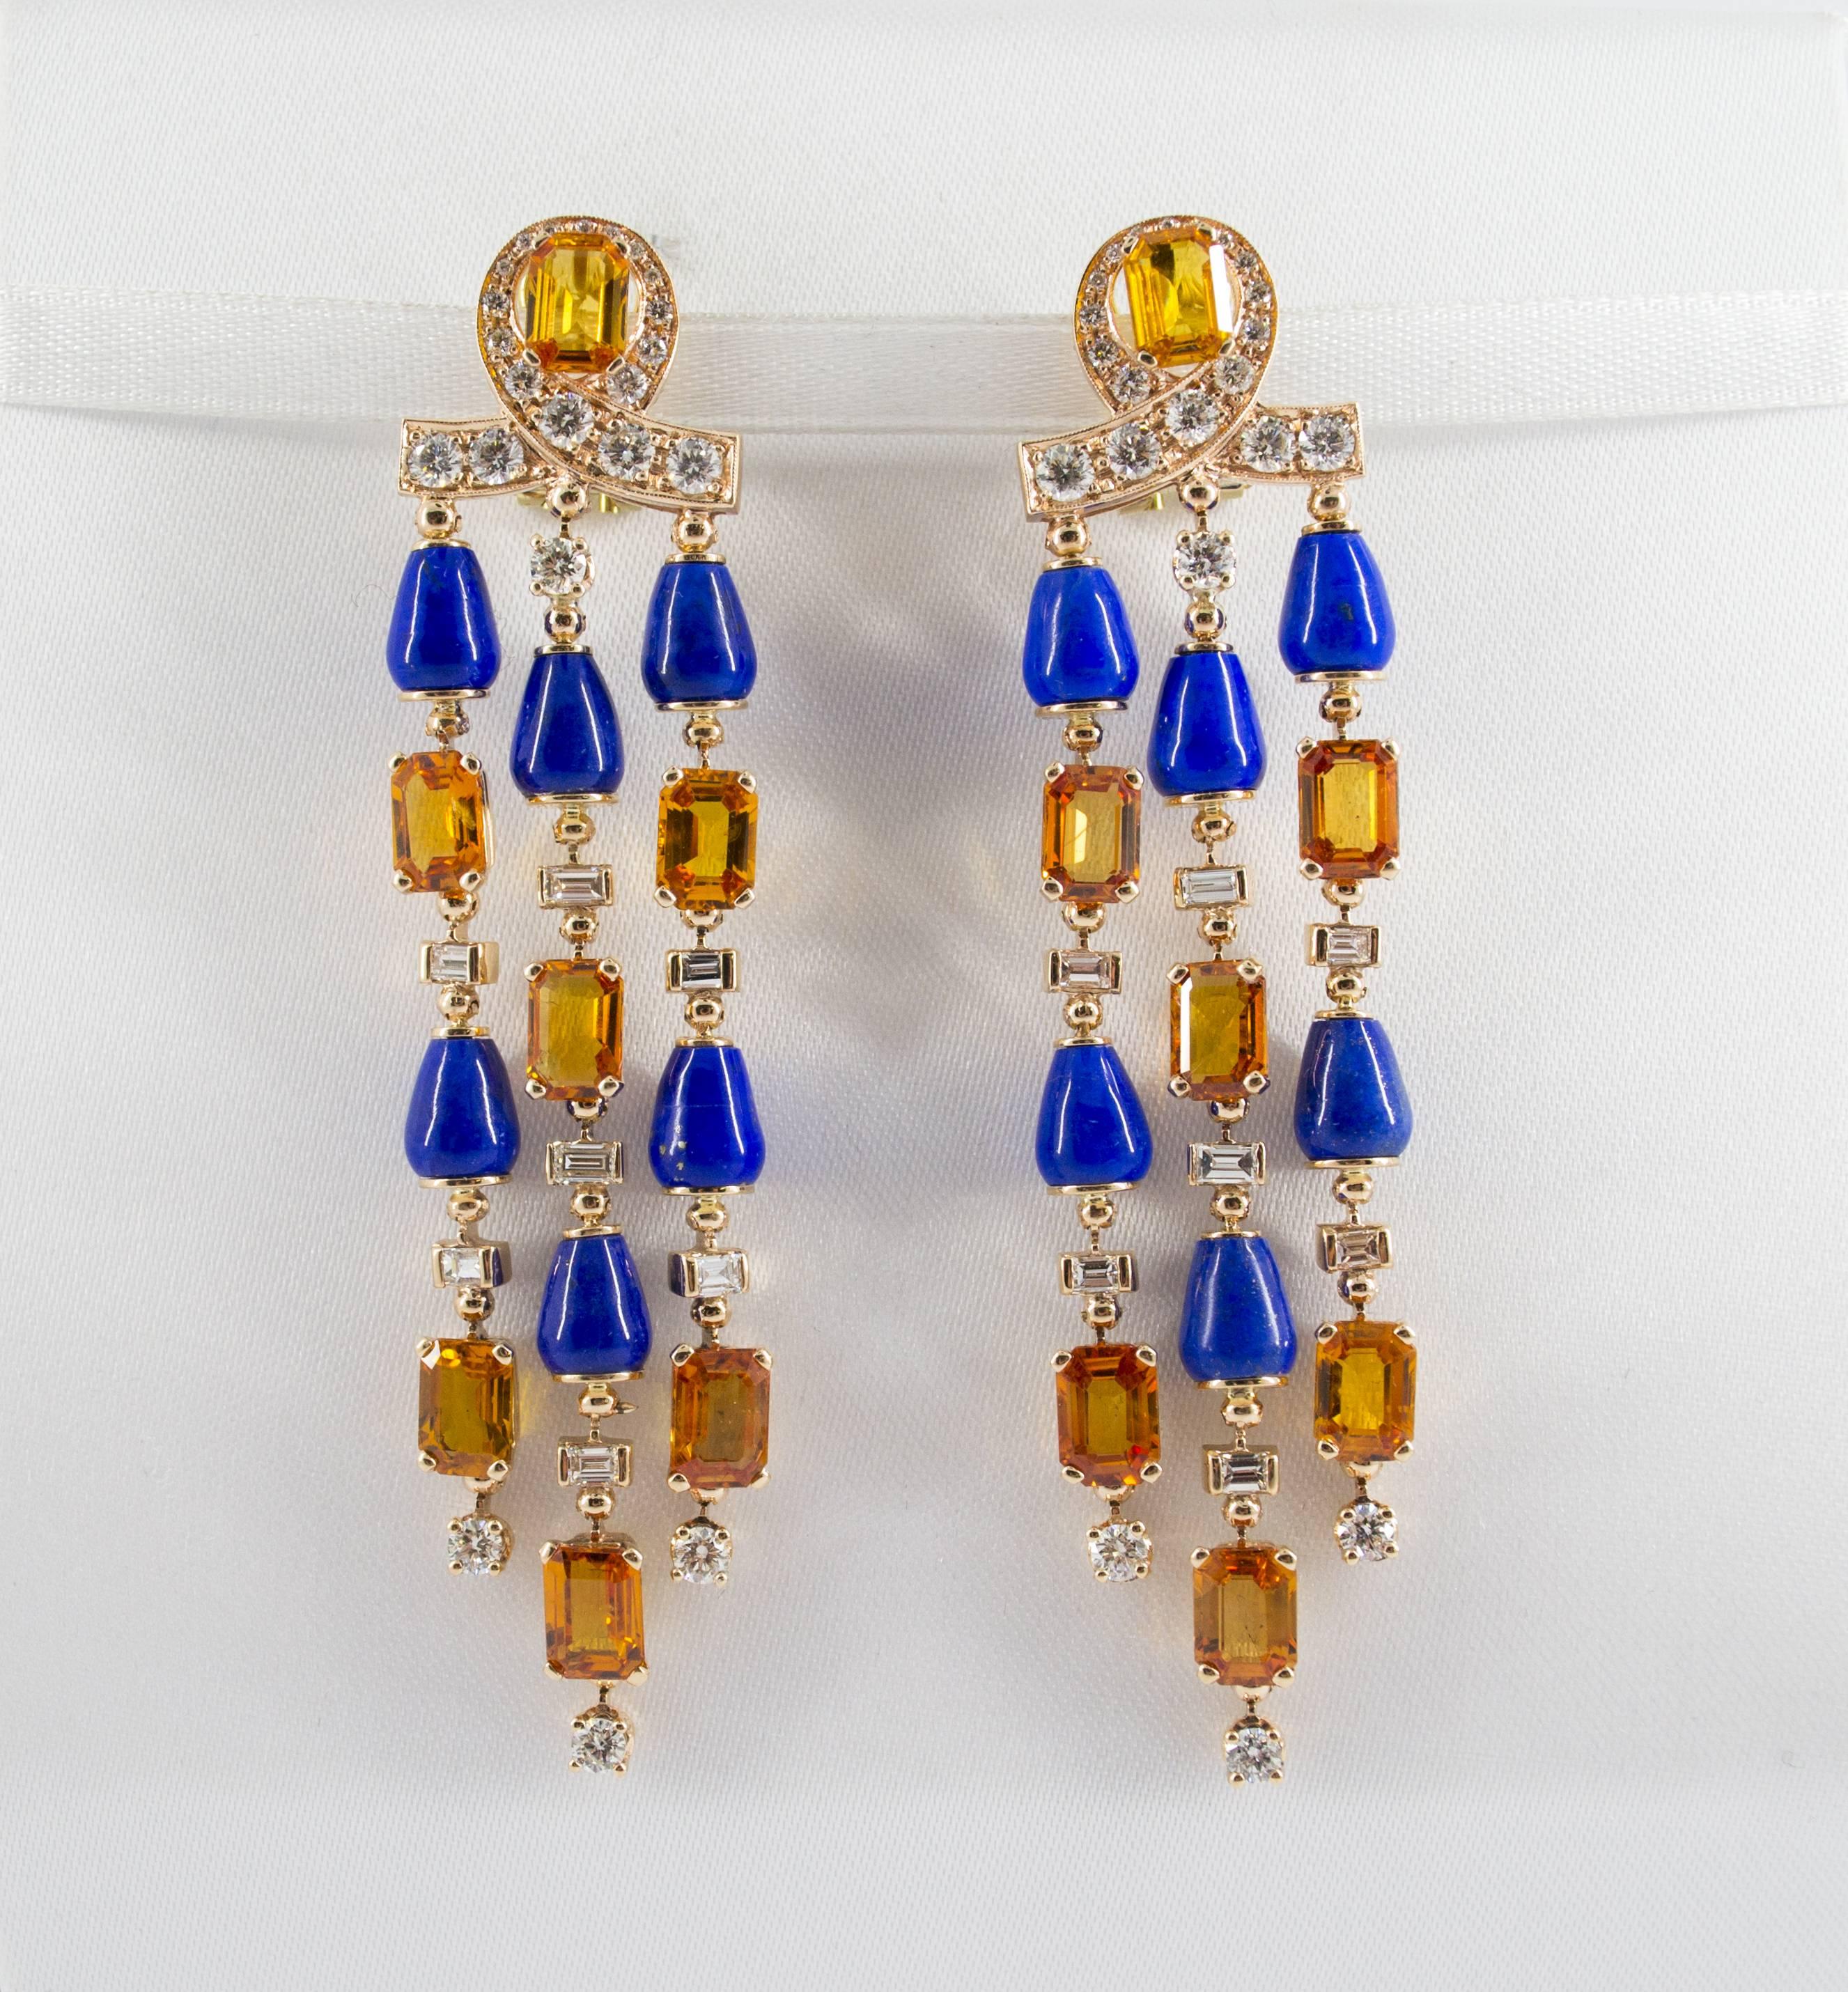 These Earrings are made of 14K Yellow Gold.
These Earrings have 2.90 Carats of White Brilliant Cut and Baguette Cut Diamonds.
These Earrings have 14.00 Carats of Yellow Emerald Cut Sapphires.
These Earrings have also Lapis Lazuli.

All our Earrings